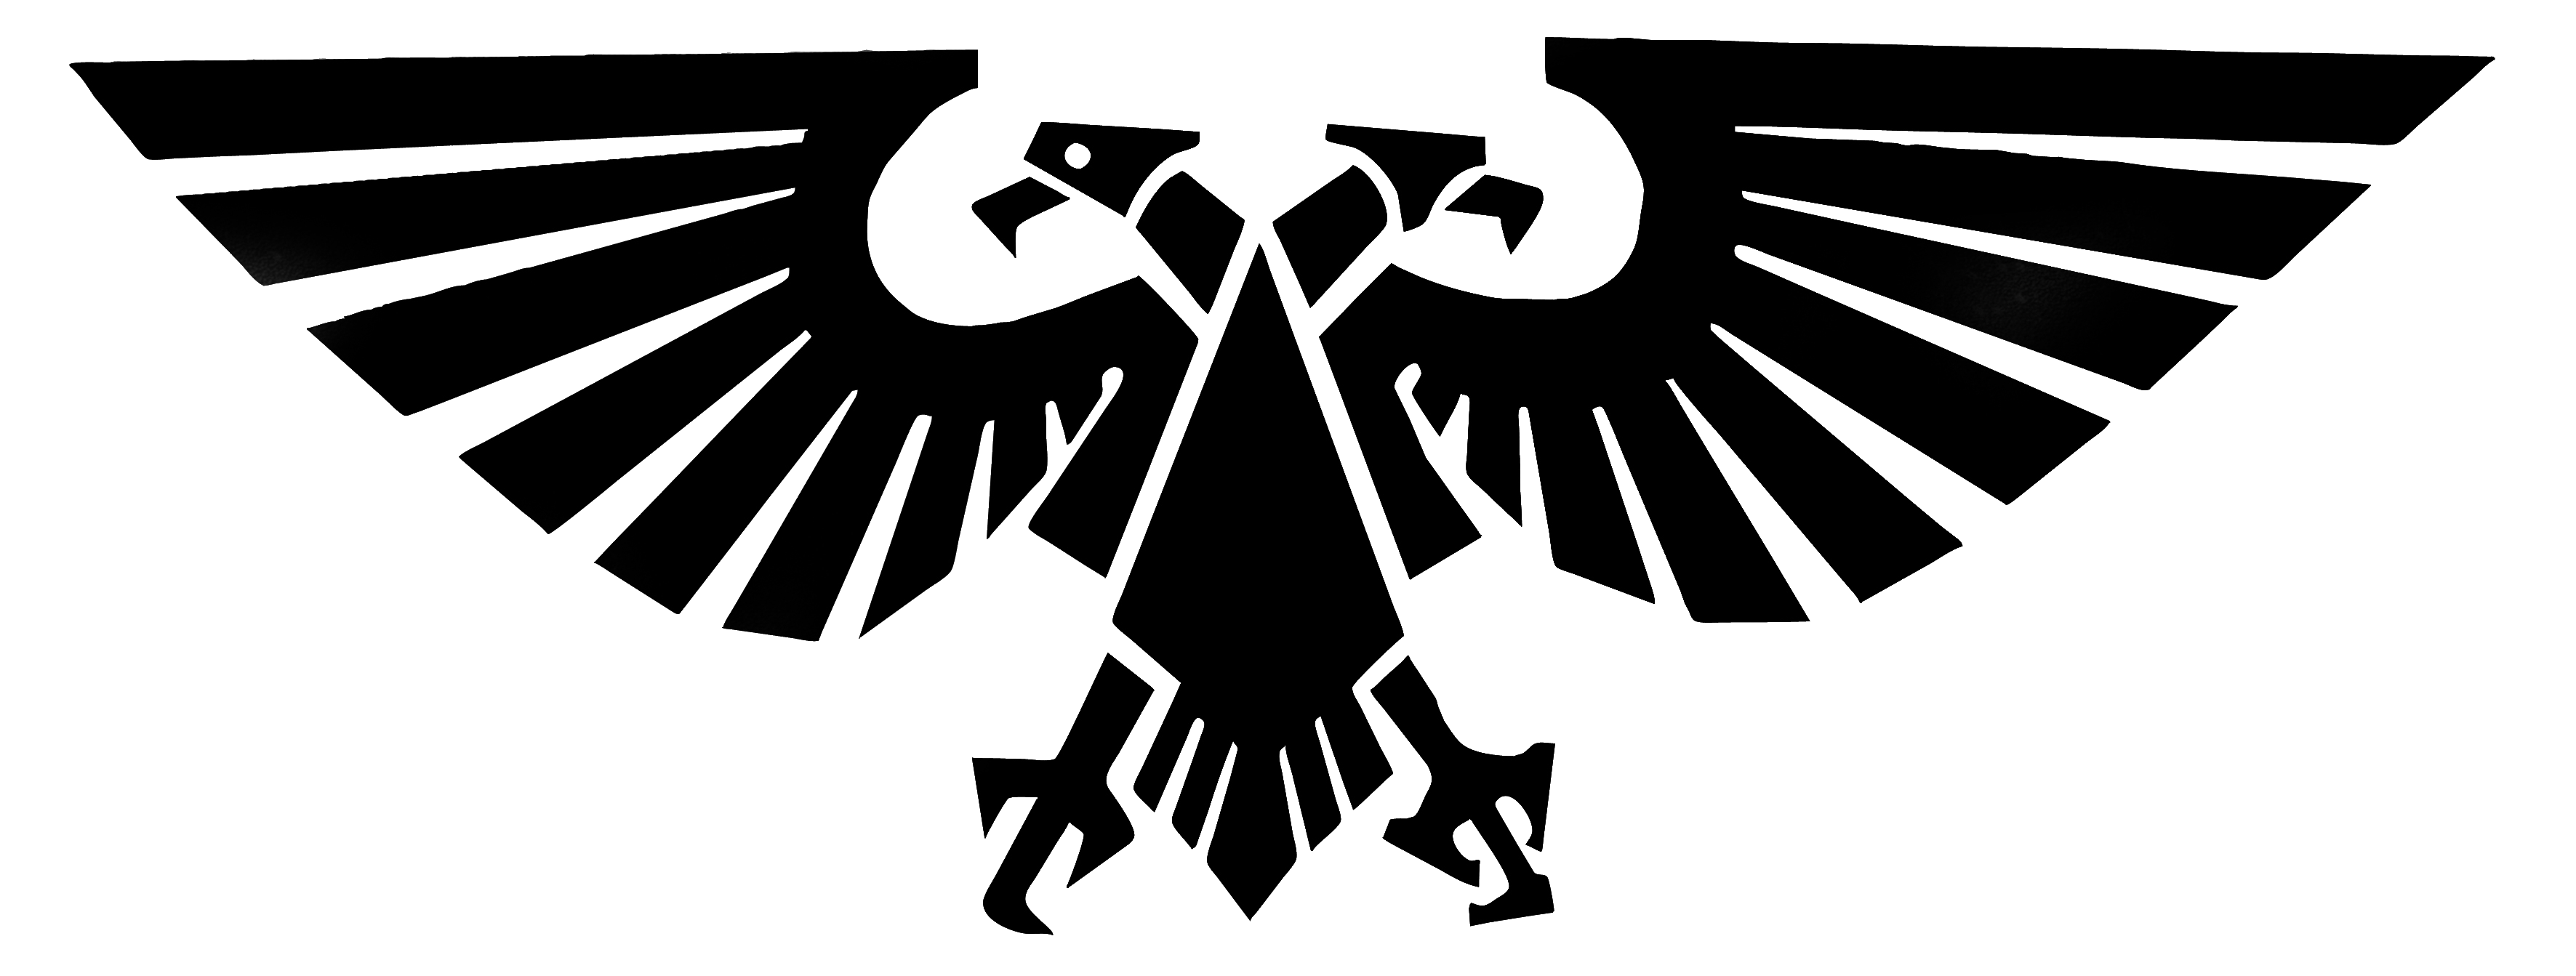 Two Eagles Logo - Eagle PNG image, free picture download